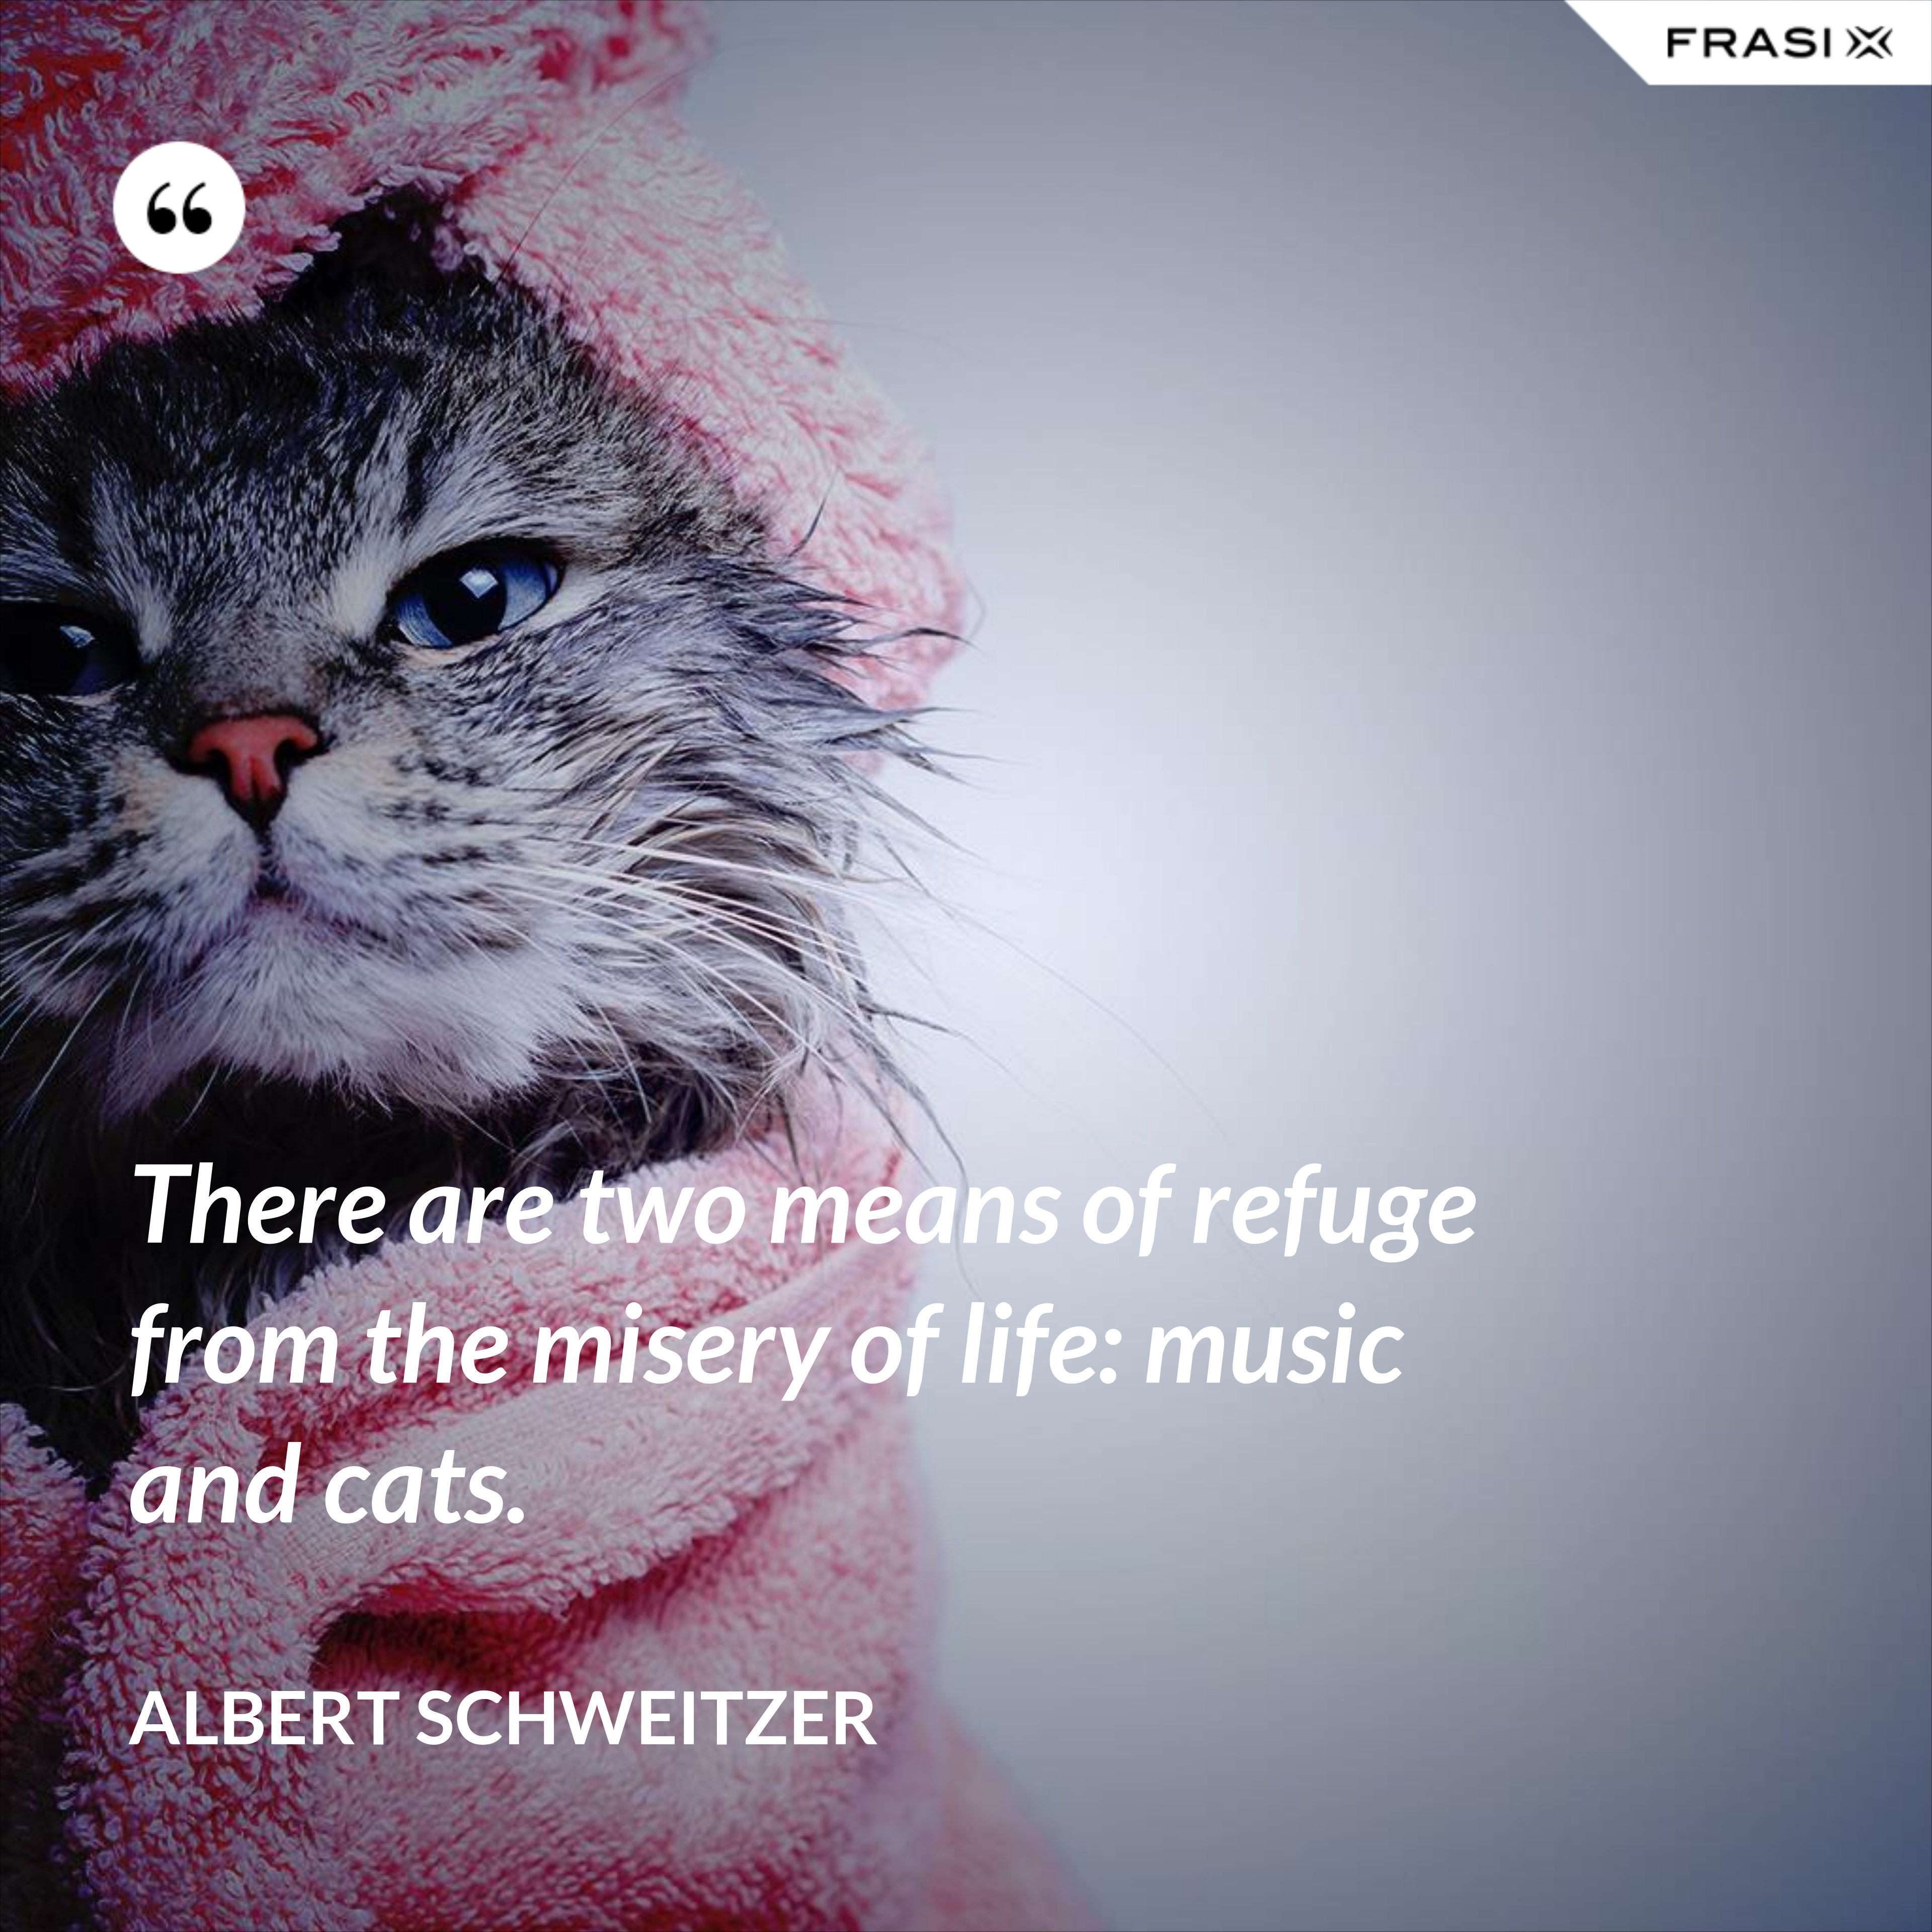 There are two means of refuge from the misery of life: music and cats. - Albert Schweitzer